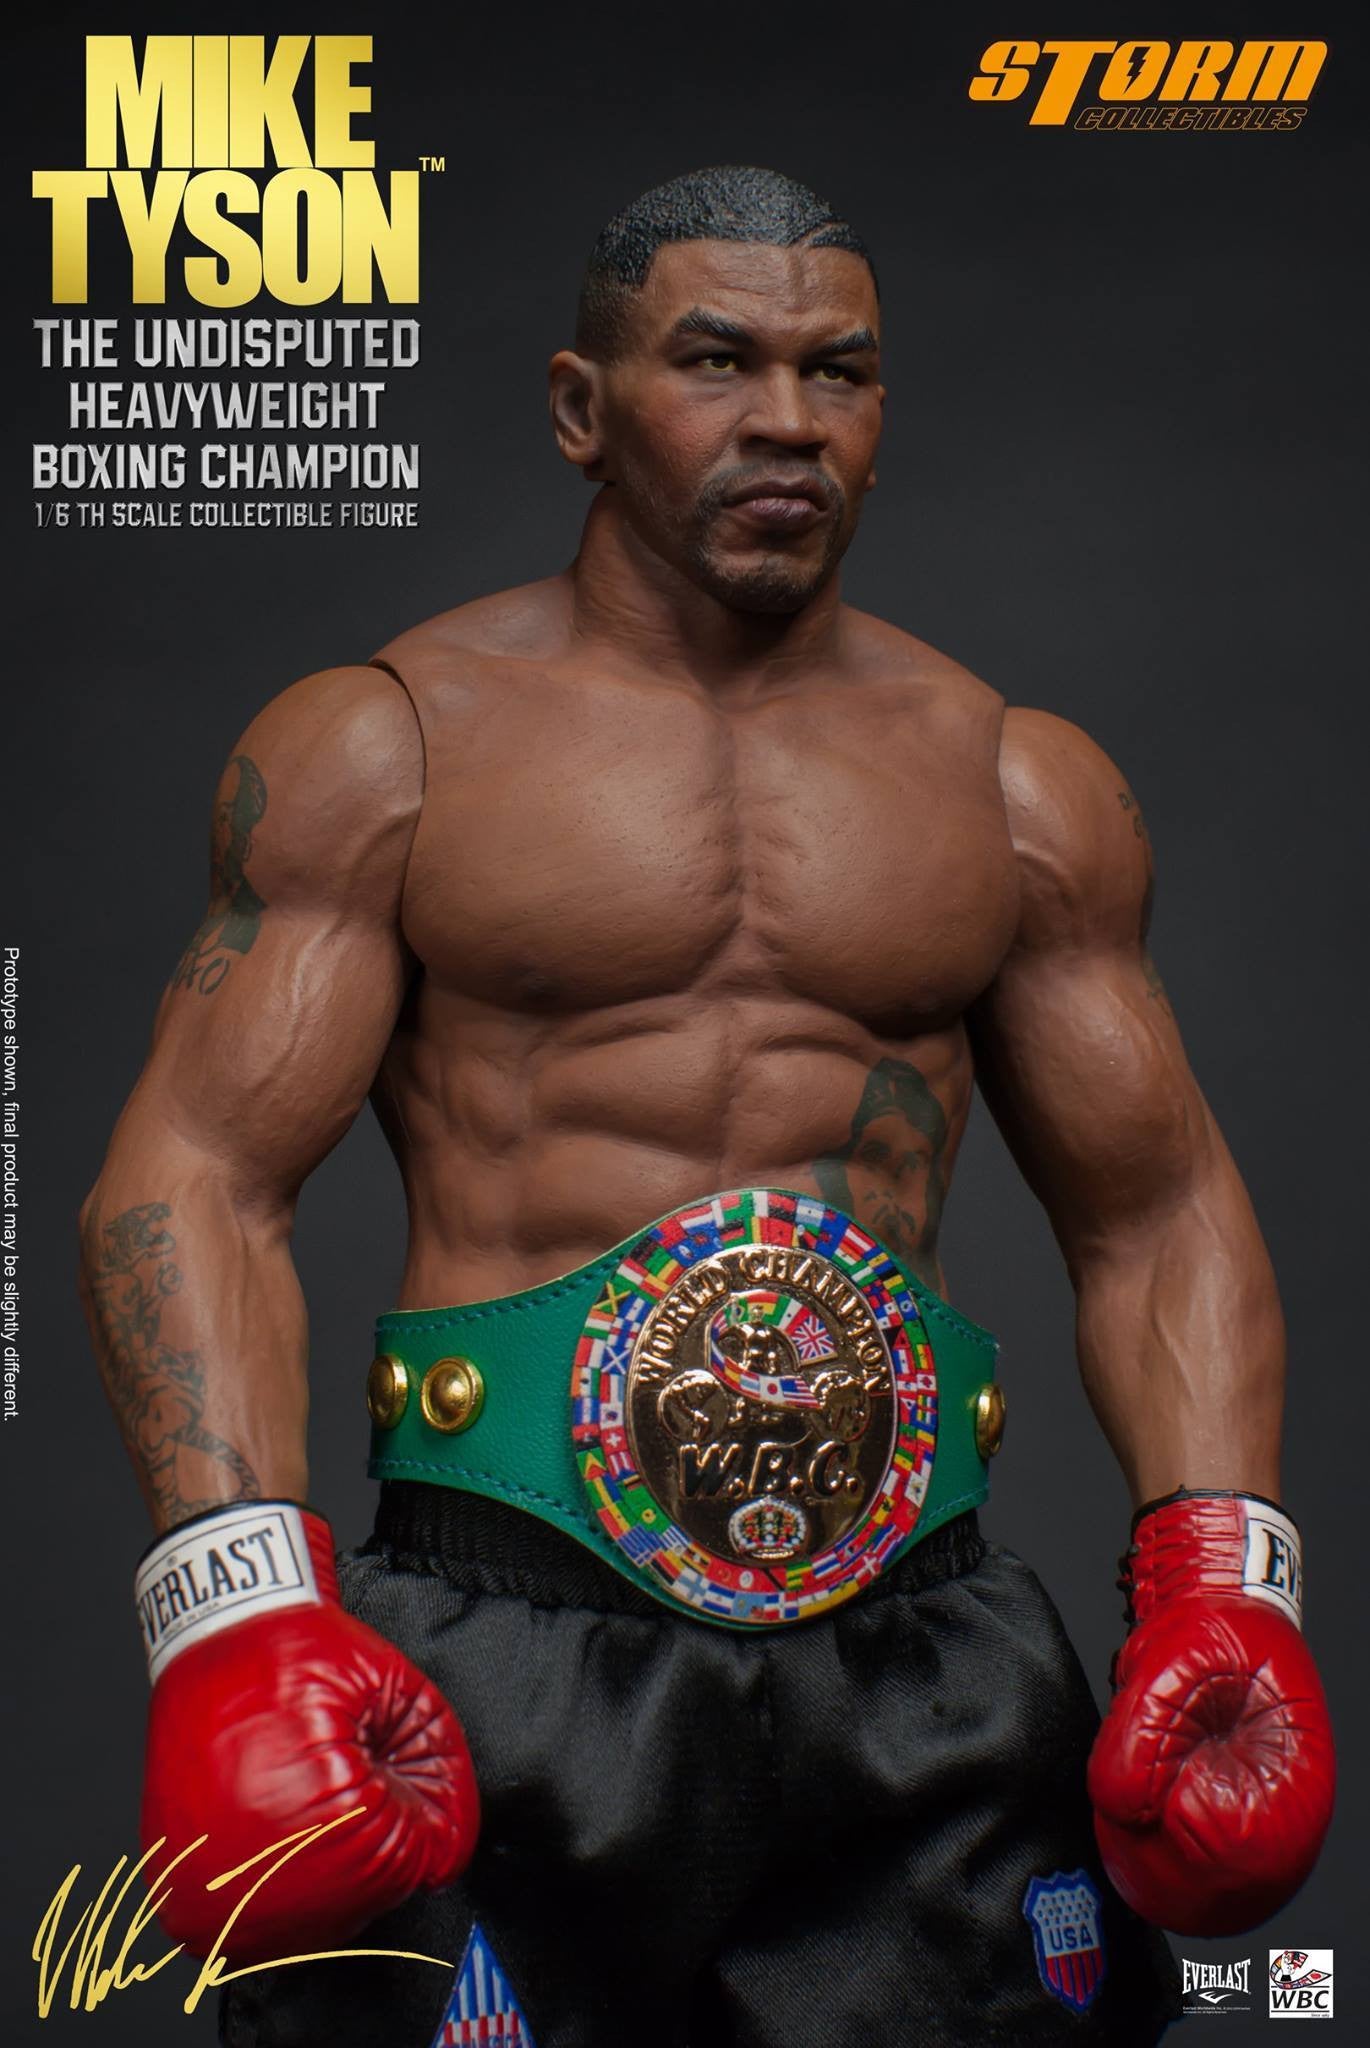 Storm Collectibles - 1:6 Scale Collectible Figure - Mike Tyson "The Undisputed Heavyweight Boxing Champion" - Marvelous Toys - 6